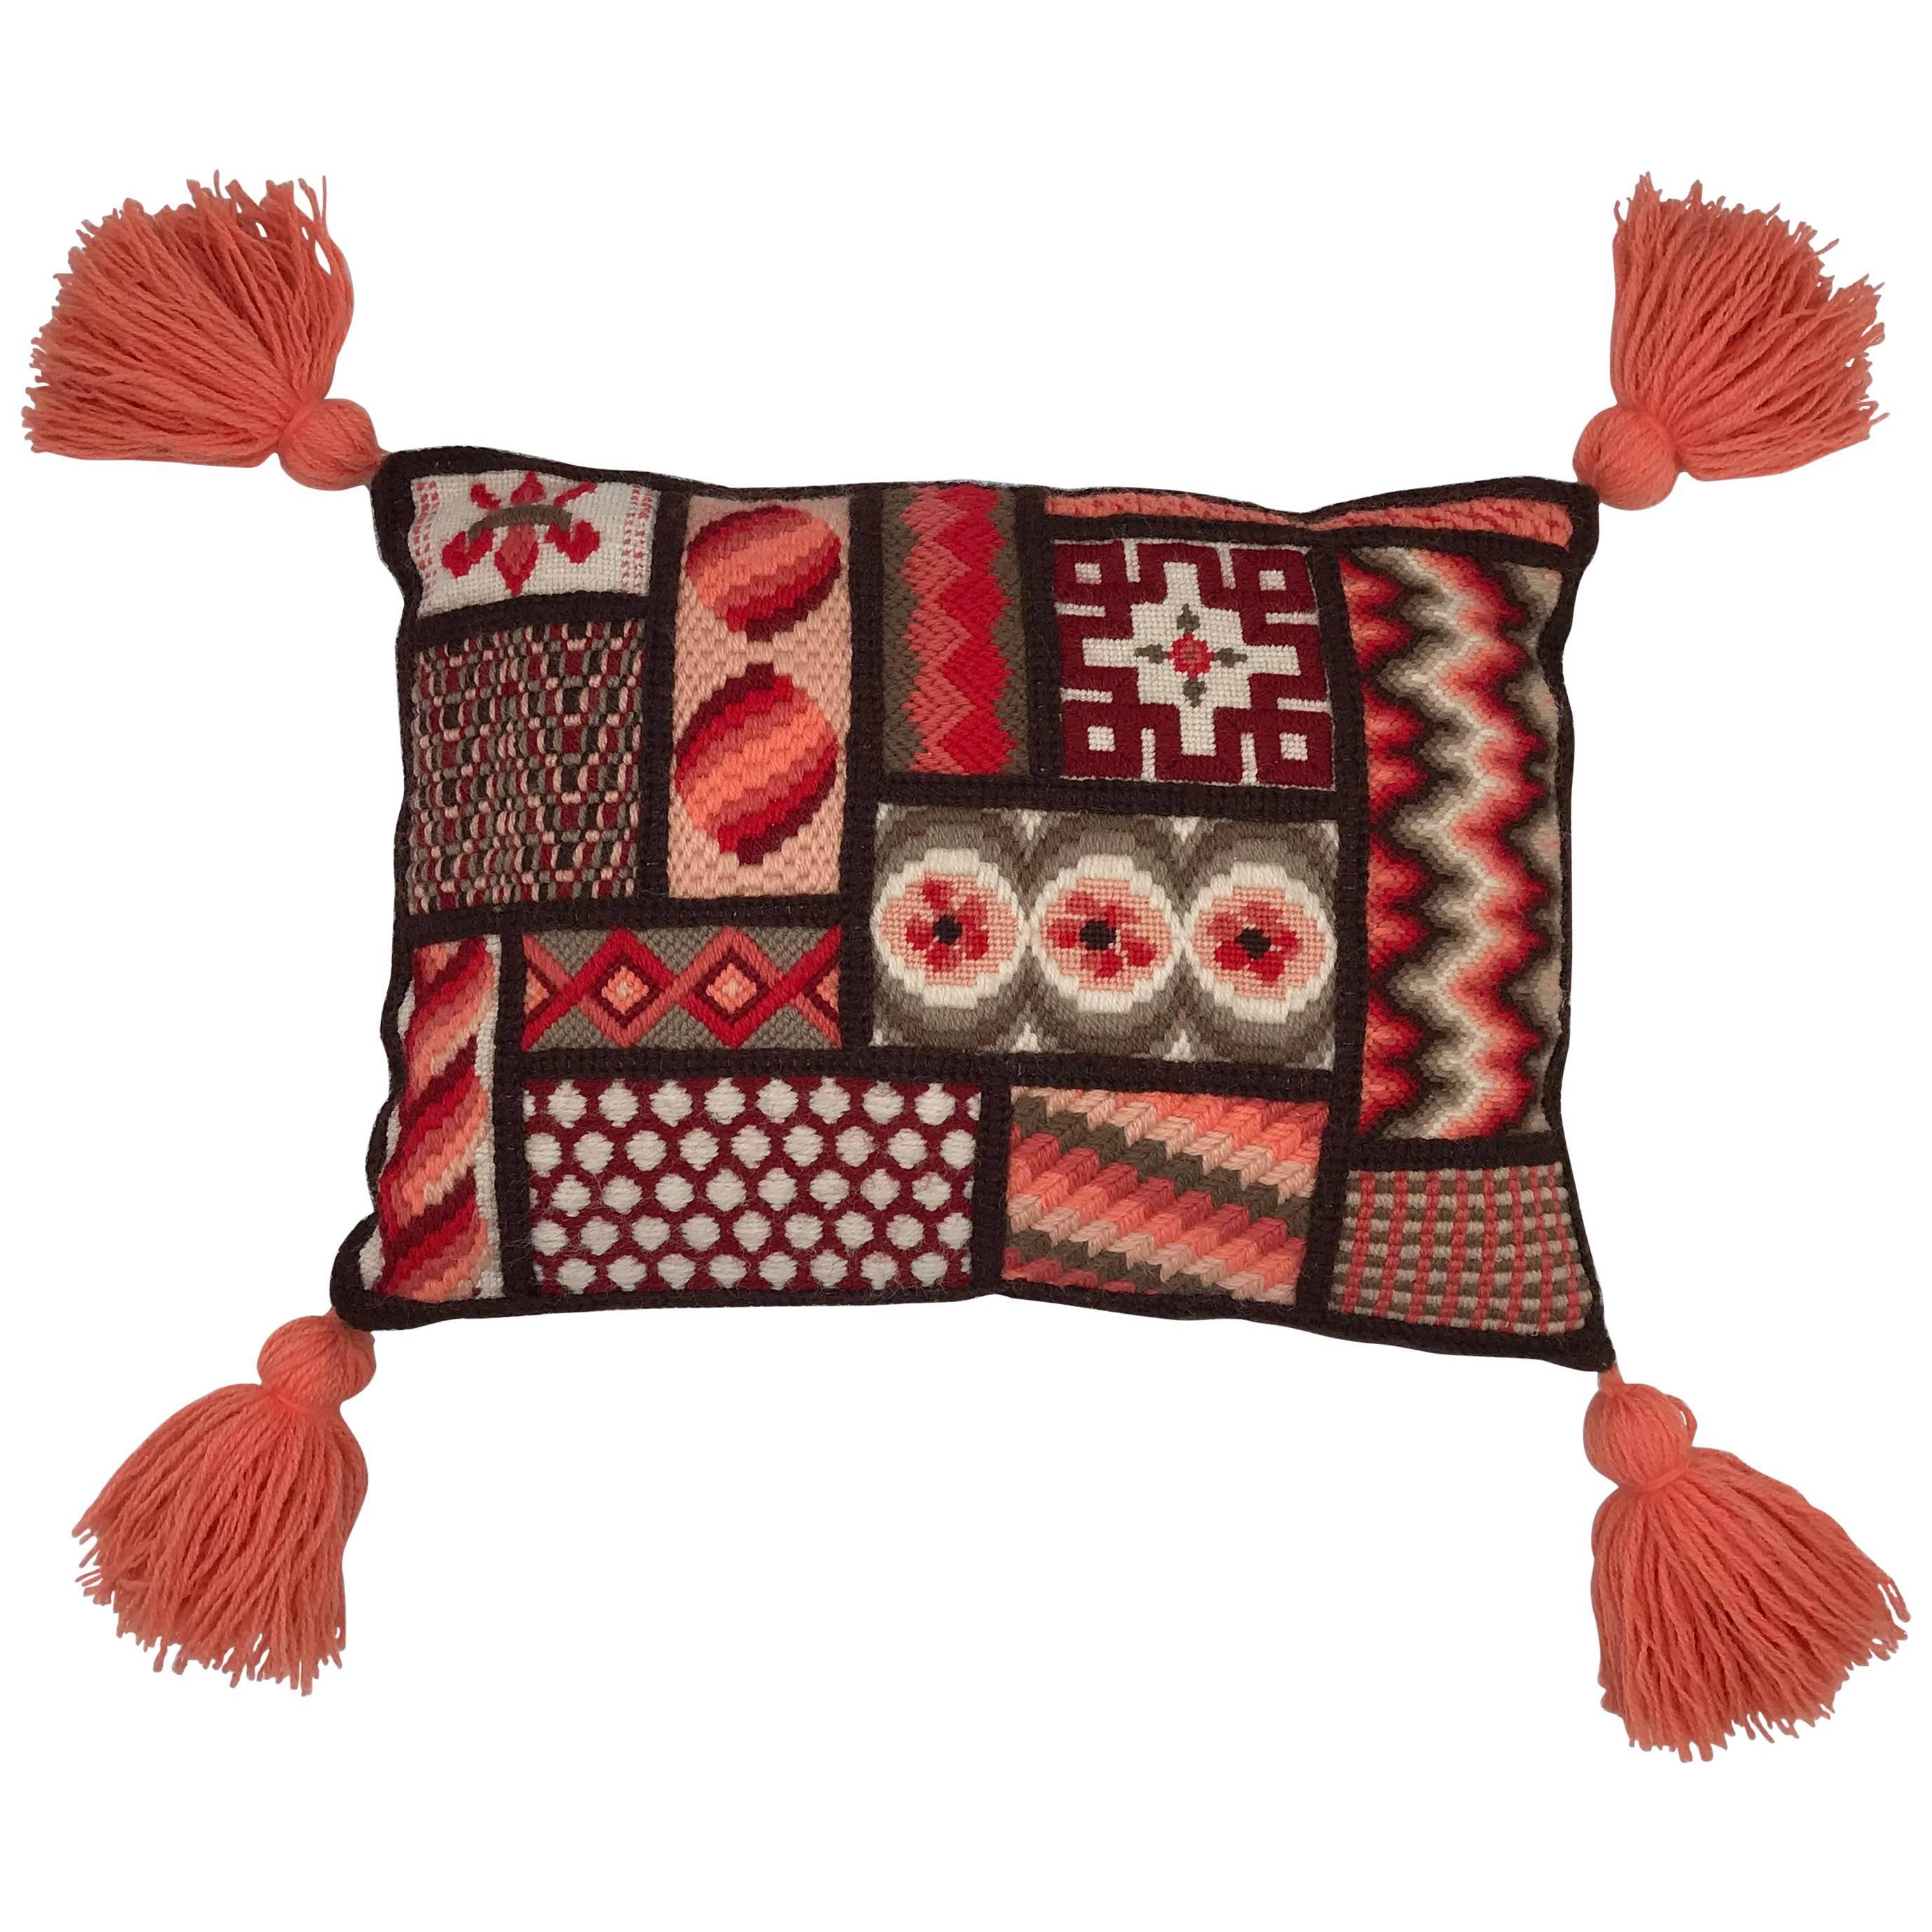 Moroccan Style Needlepoint Pillow with Tassels